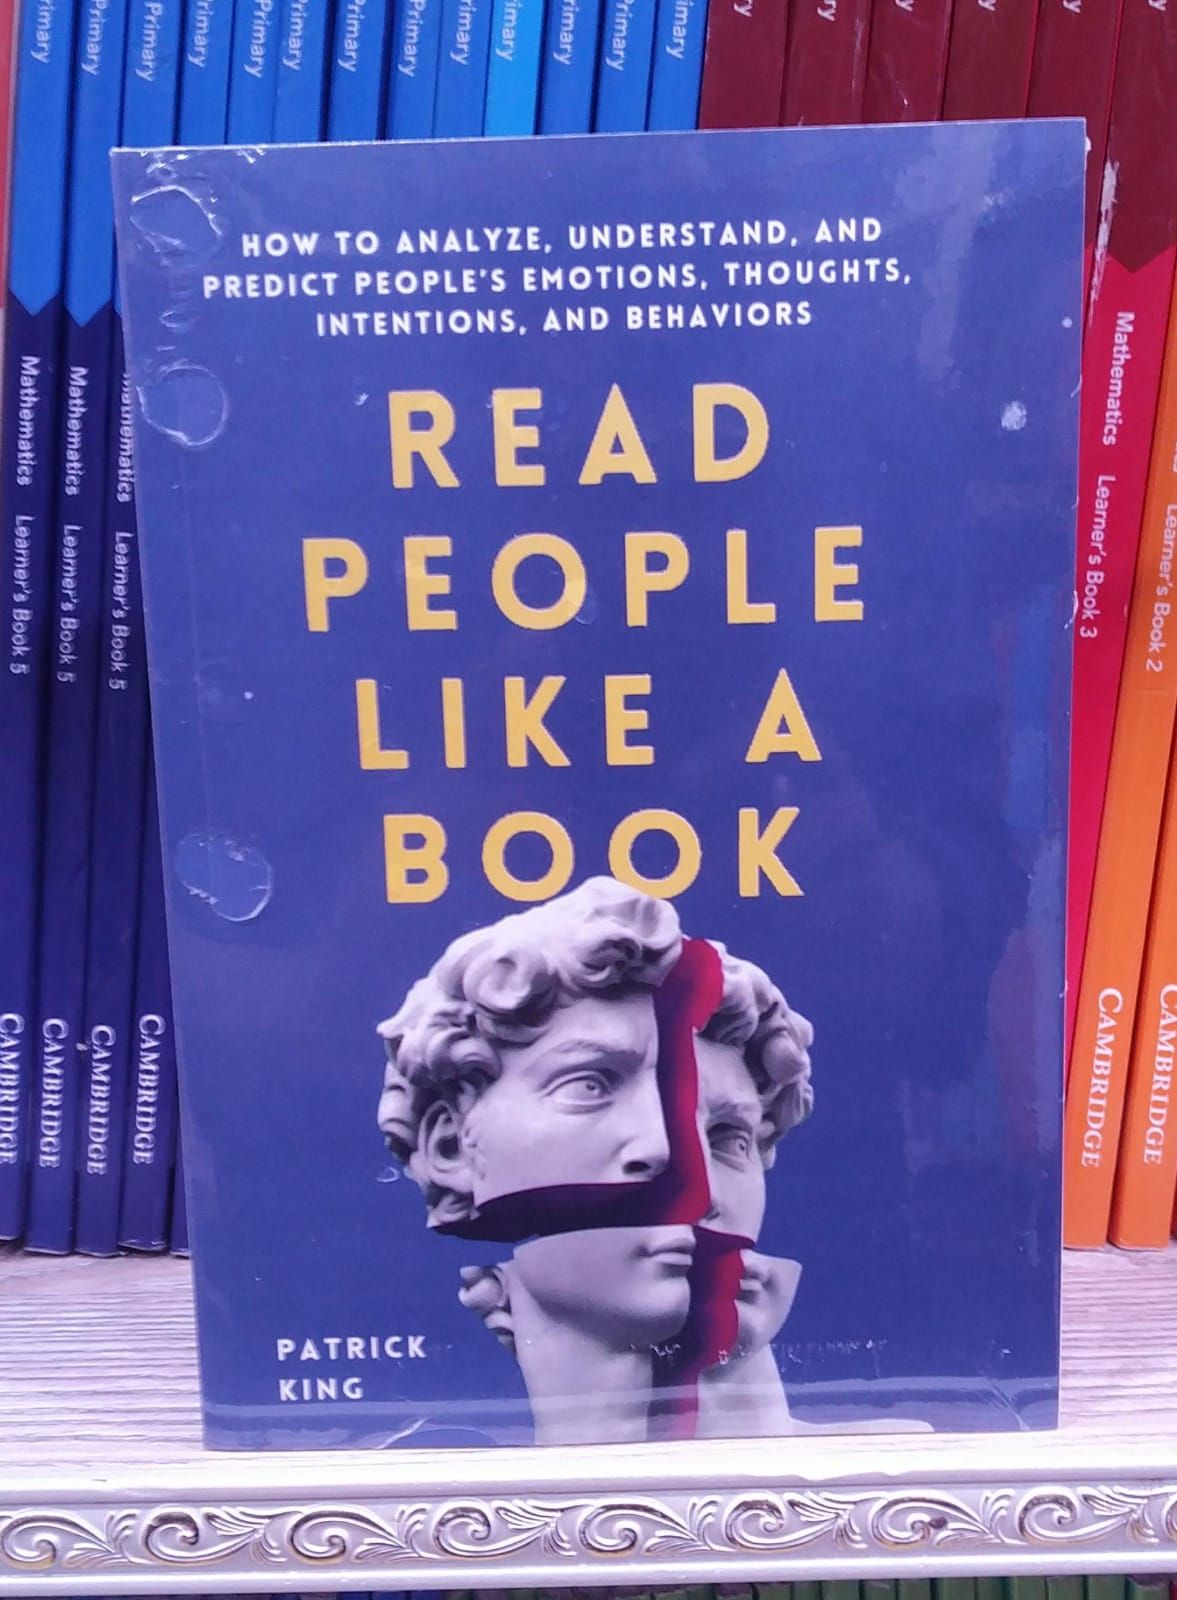 Read People Like a Book: How to Analyze, Understand, and Predict